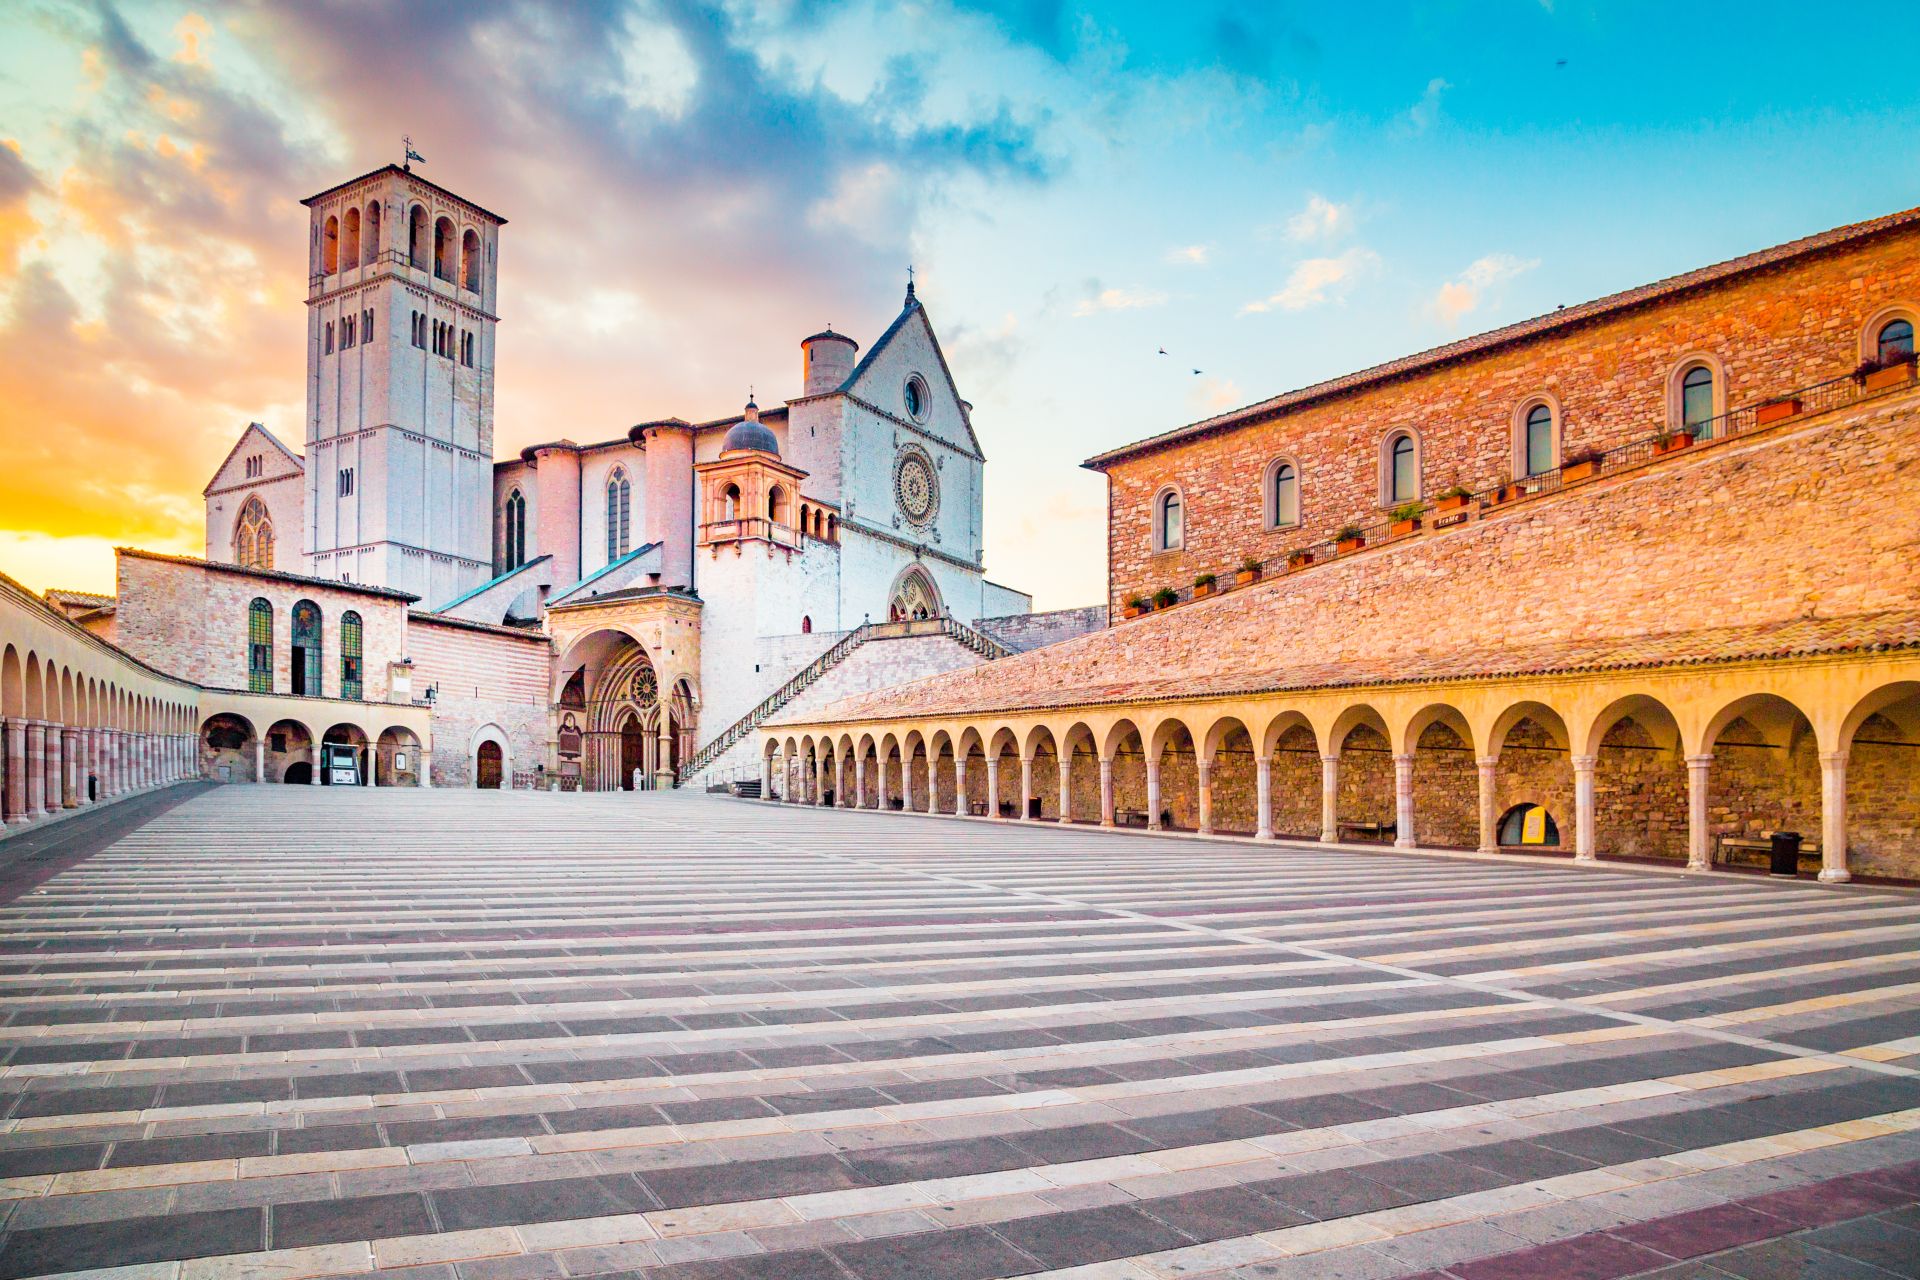 Famous-Basilica-of-St.-Francis-of-Assisi-Basilica-Papale-di-San-Francesco-with-Lower-Plaza-at-sunset-in-Assisi-Umbria-Italy